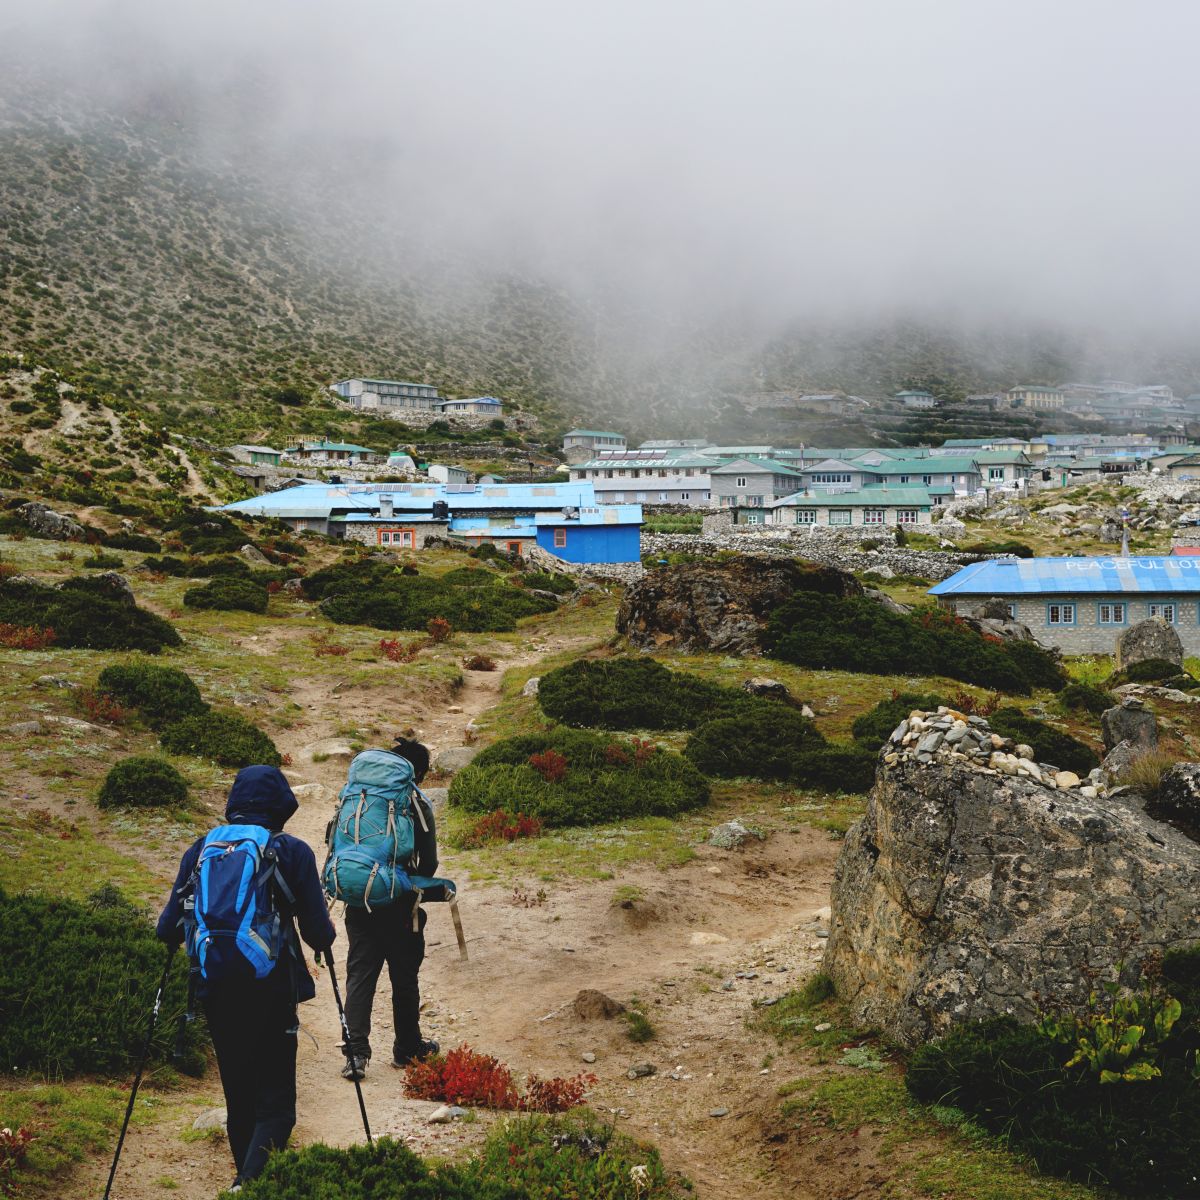 Trekking tips for beginners – because there's more to it than just